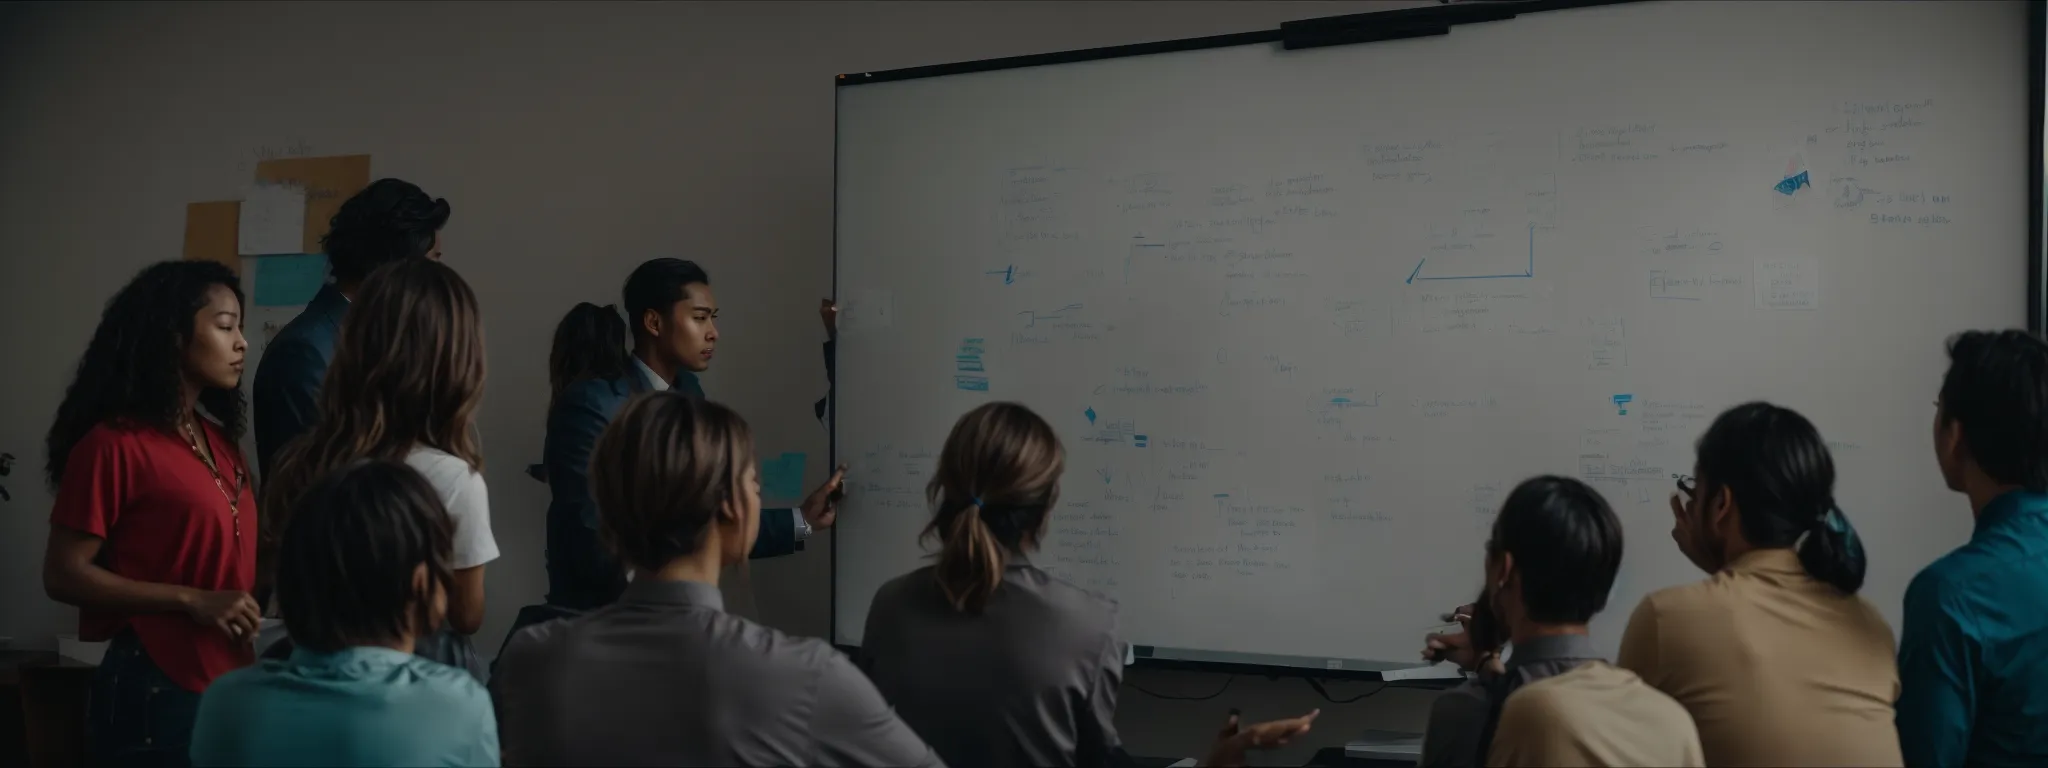 a group of people engaging in a brainstorming session with a whiteboard full of strategies visible in the background.